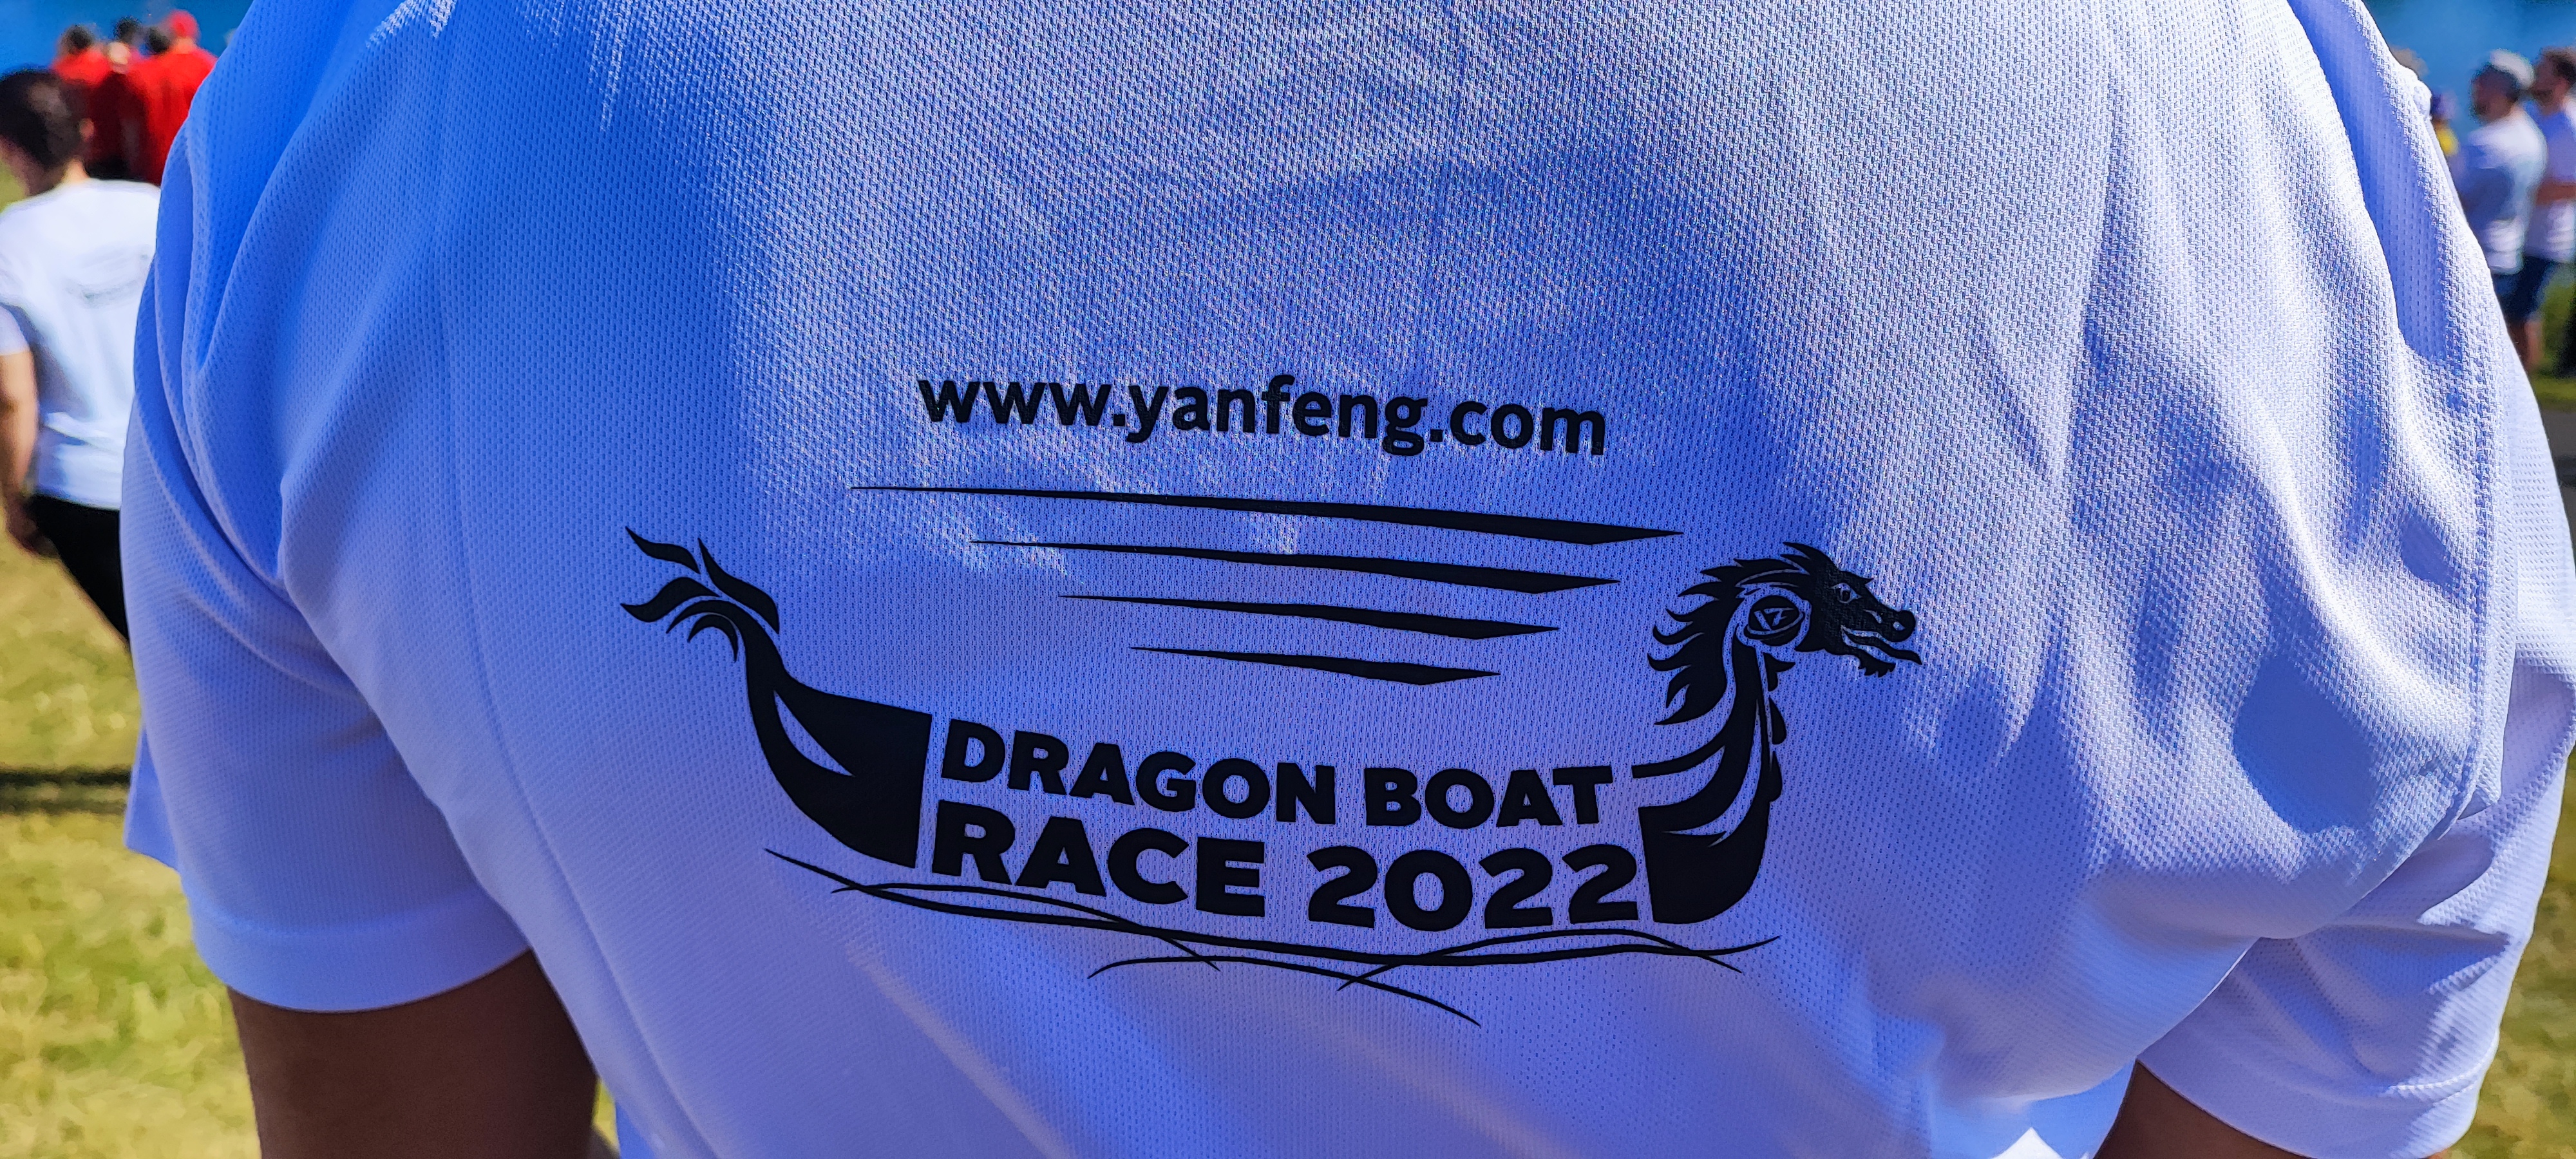 T-shirt from the Dragonboat race